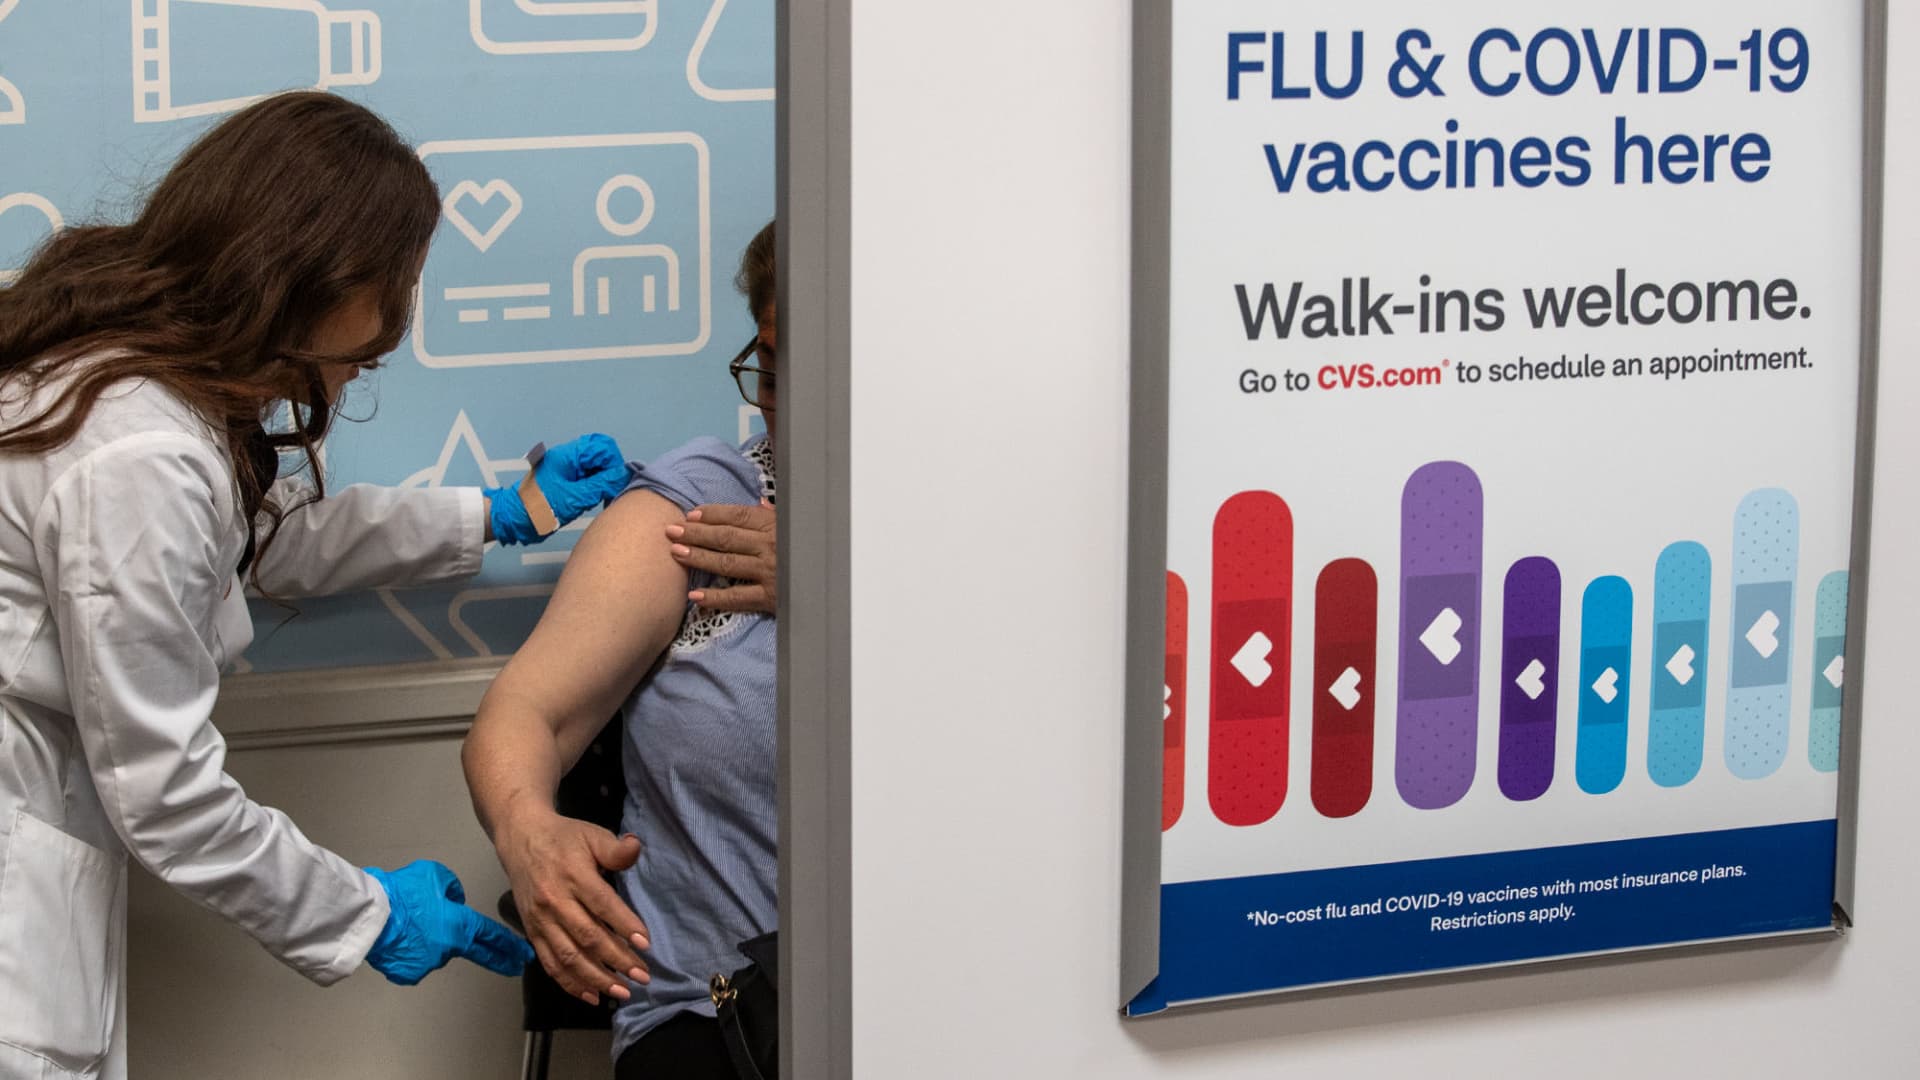 Covid, RSV and flu vaccines are now available — here's how to decide whether to get them together